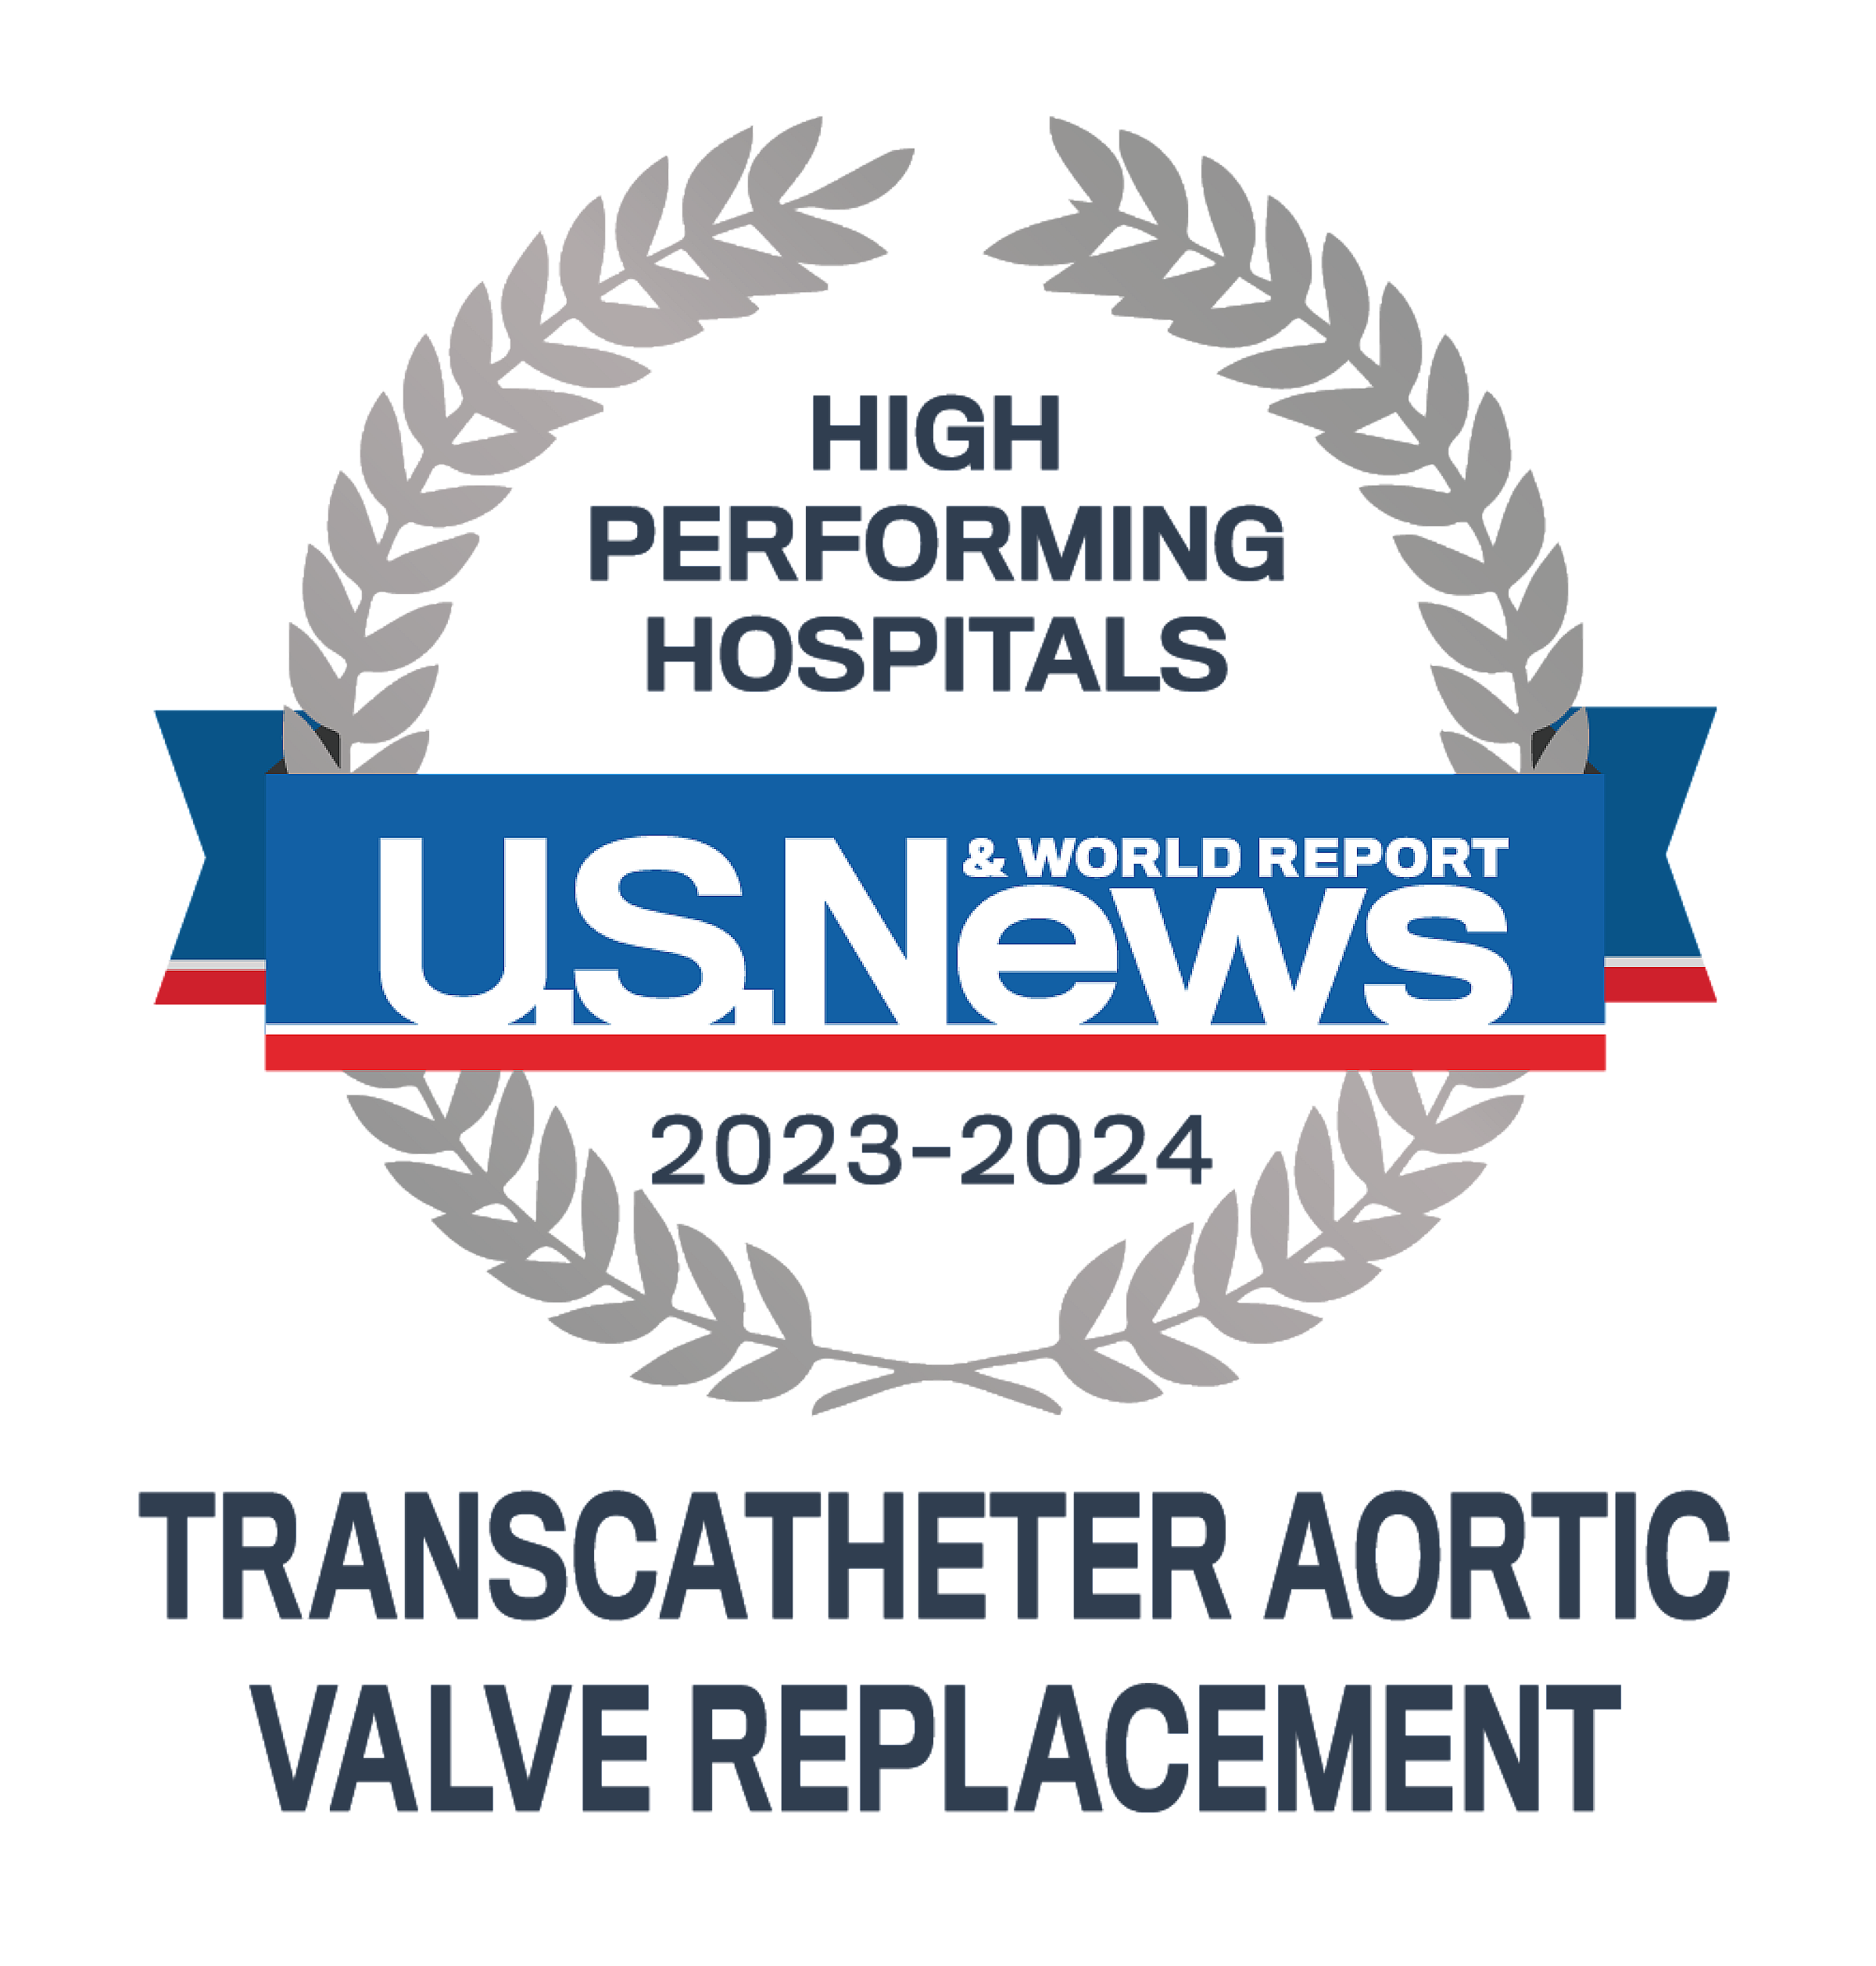 High performing treatment transcatheter aortic valve replacement treatment badge from US News & World Report 2023-2024